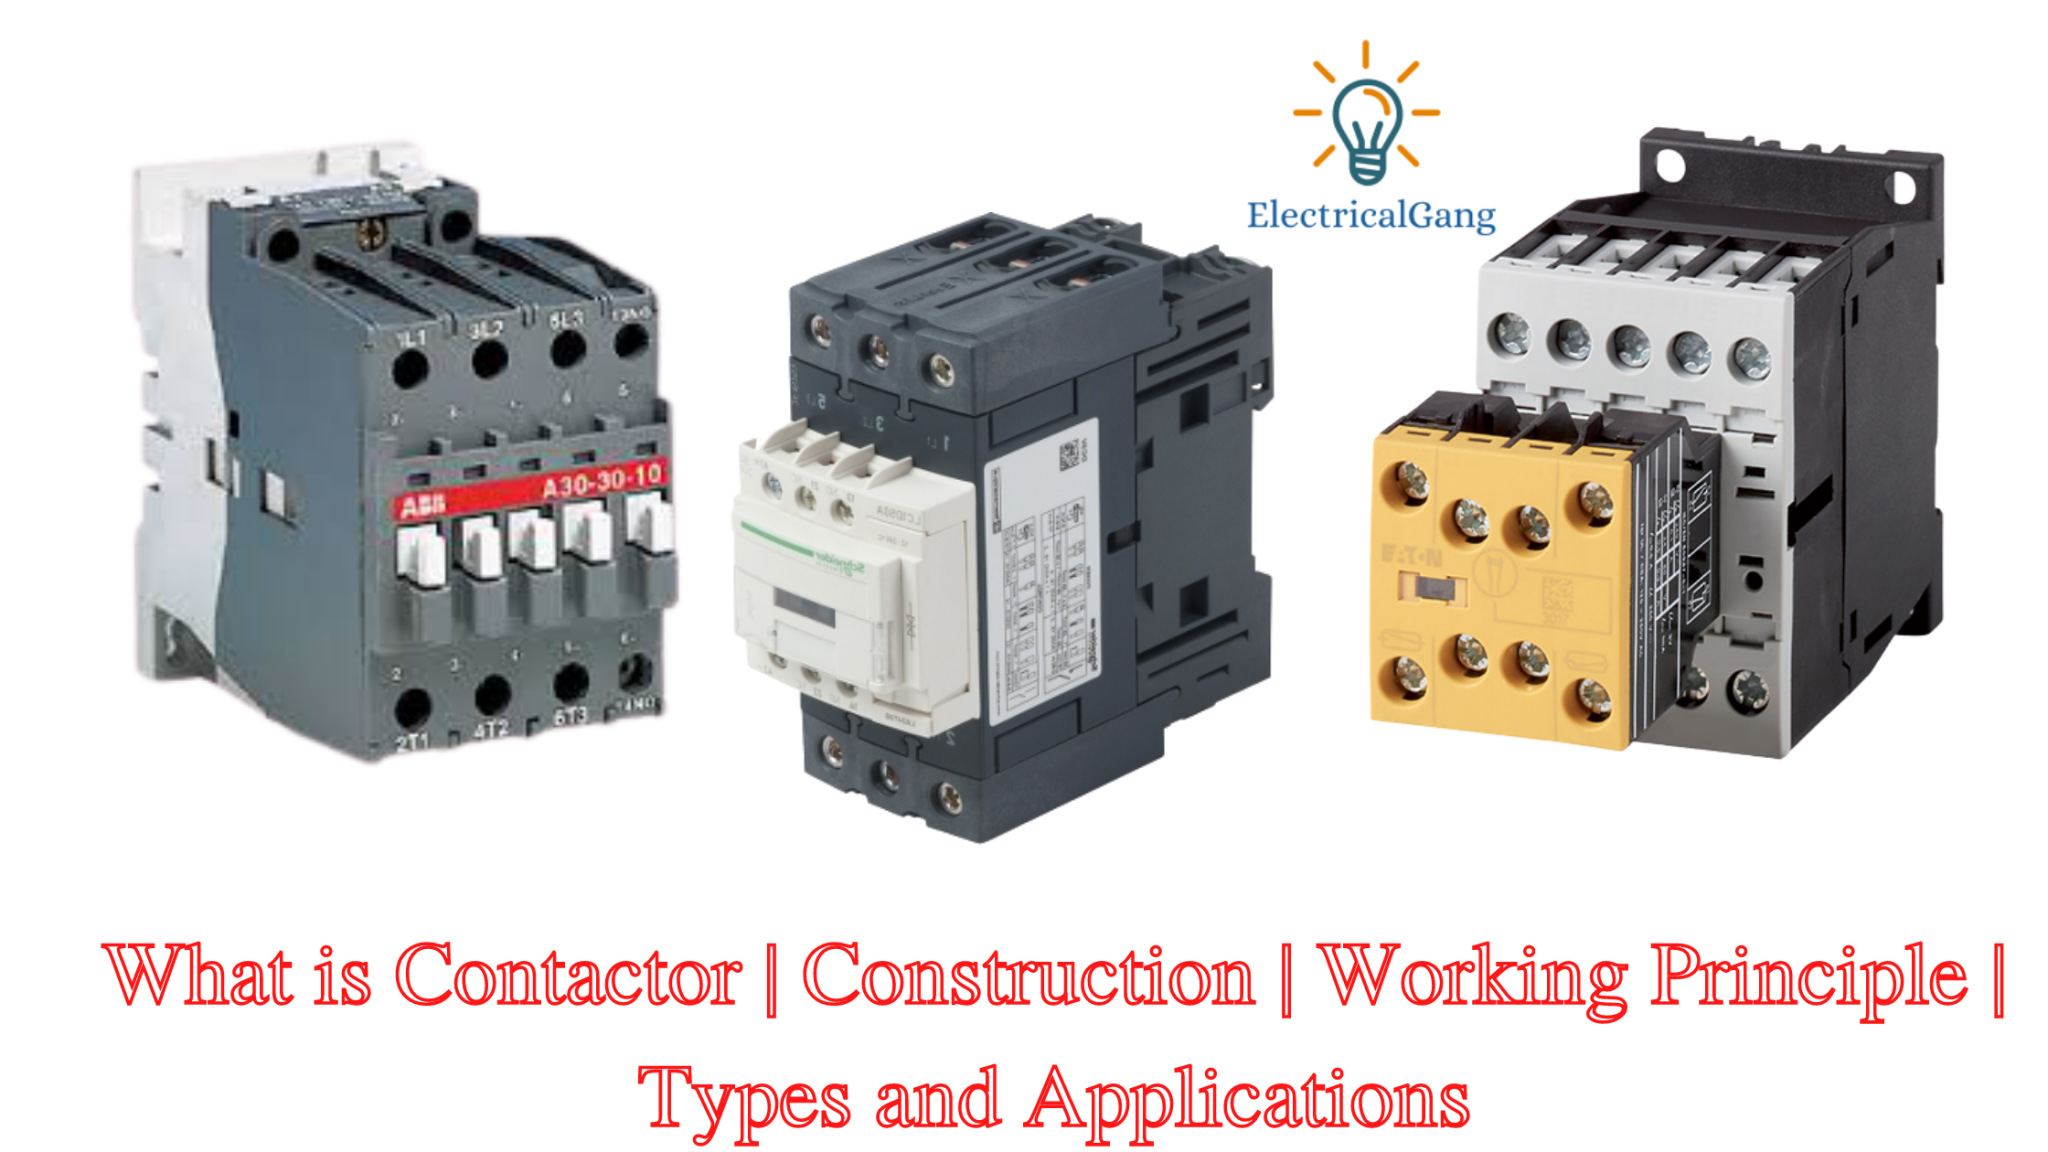 What Is Contactor Construction of Contactor Working Principle of